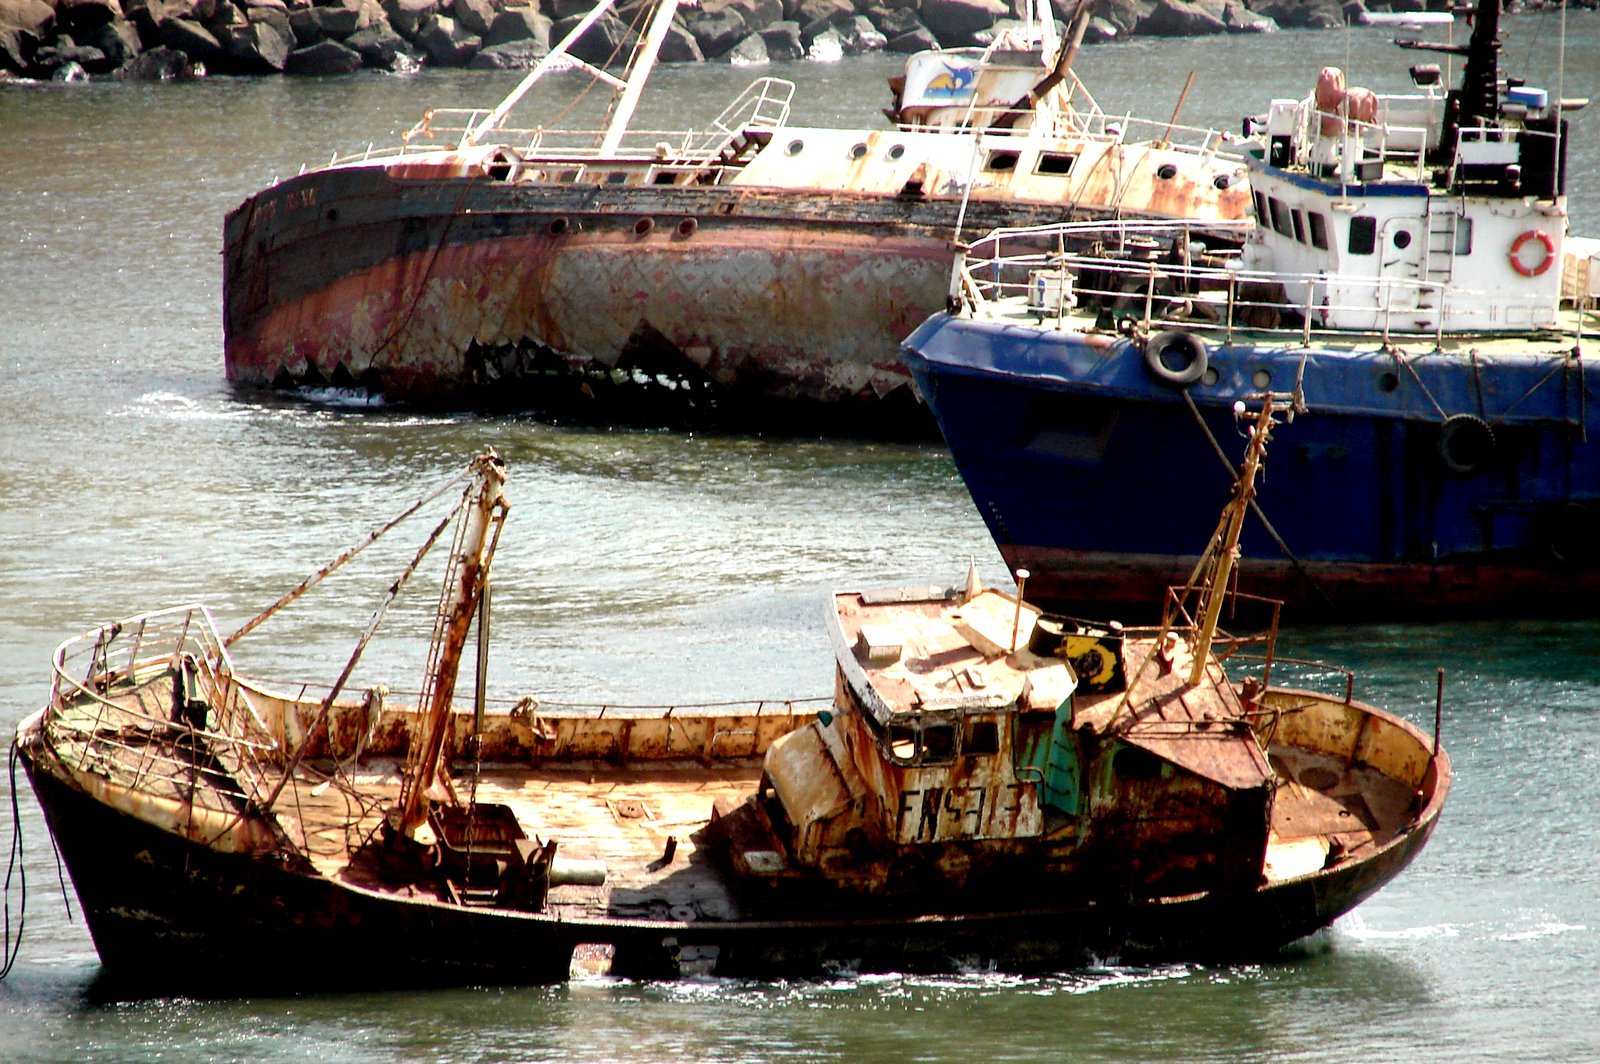 two rusted ships in the water with a rocky shore